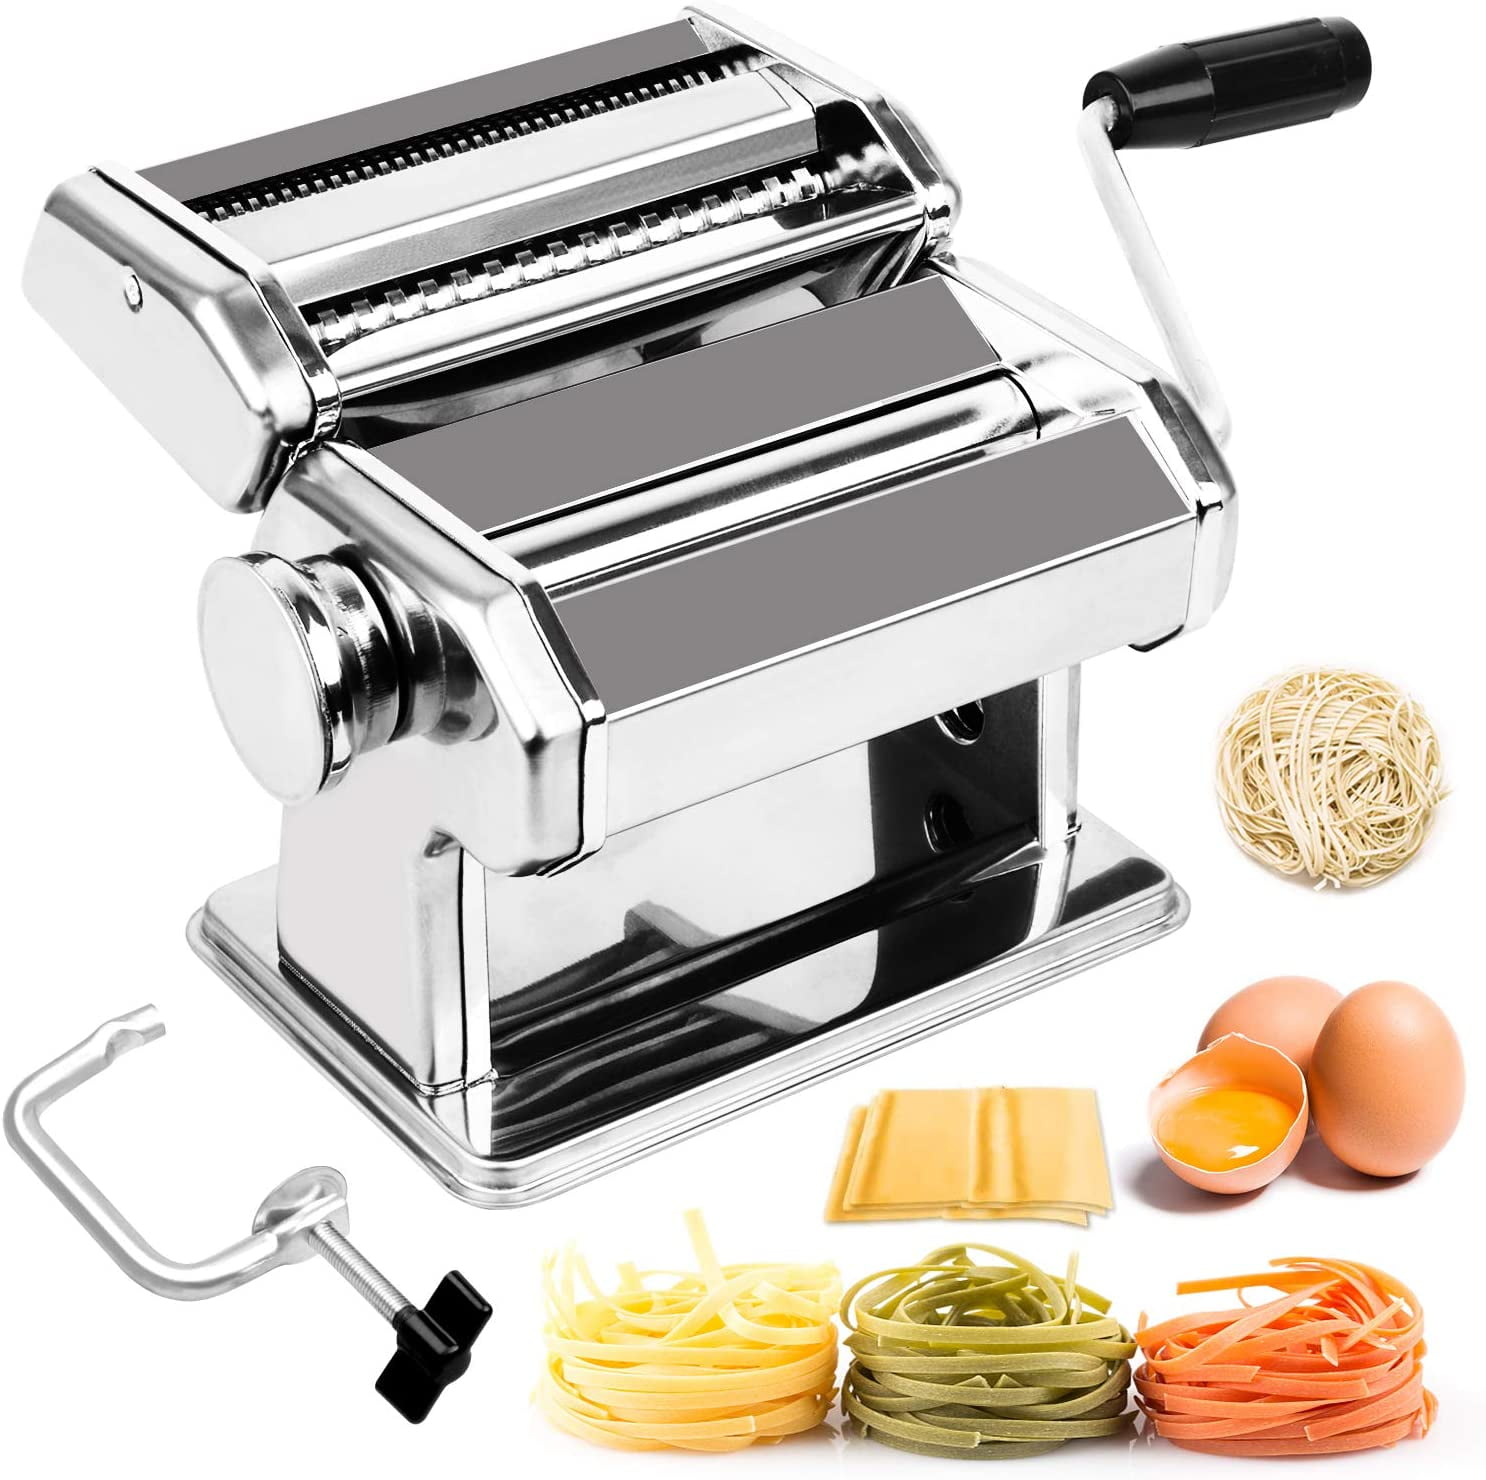 Spaghetti or Fettuccine By Cook’s Aid Roller Pasta Maker Pasta Maker Machine 7 Adjustable Thickness Settings Manual Noodles Maker with Removable Handle Lasagna Perfect for Homemade Pasta